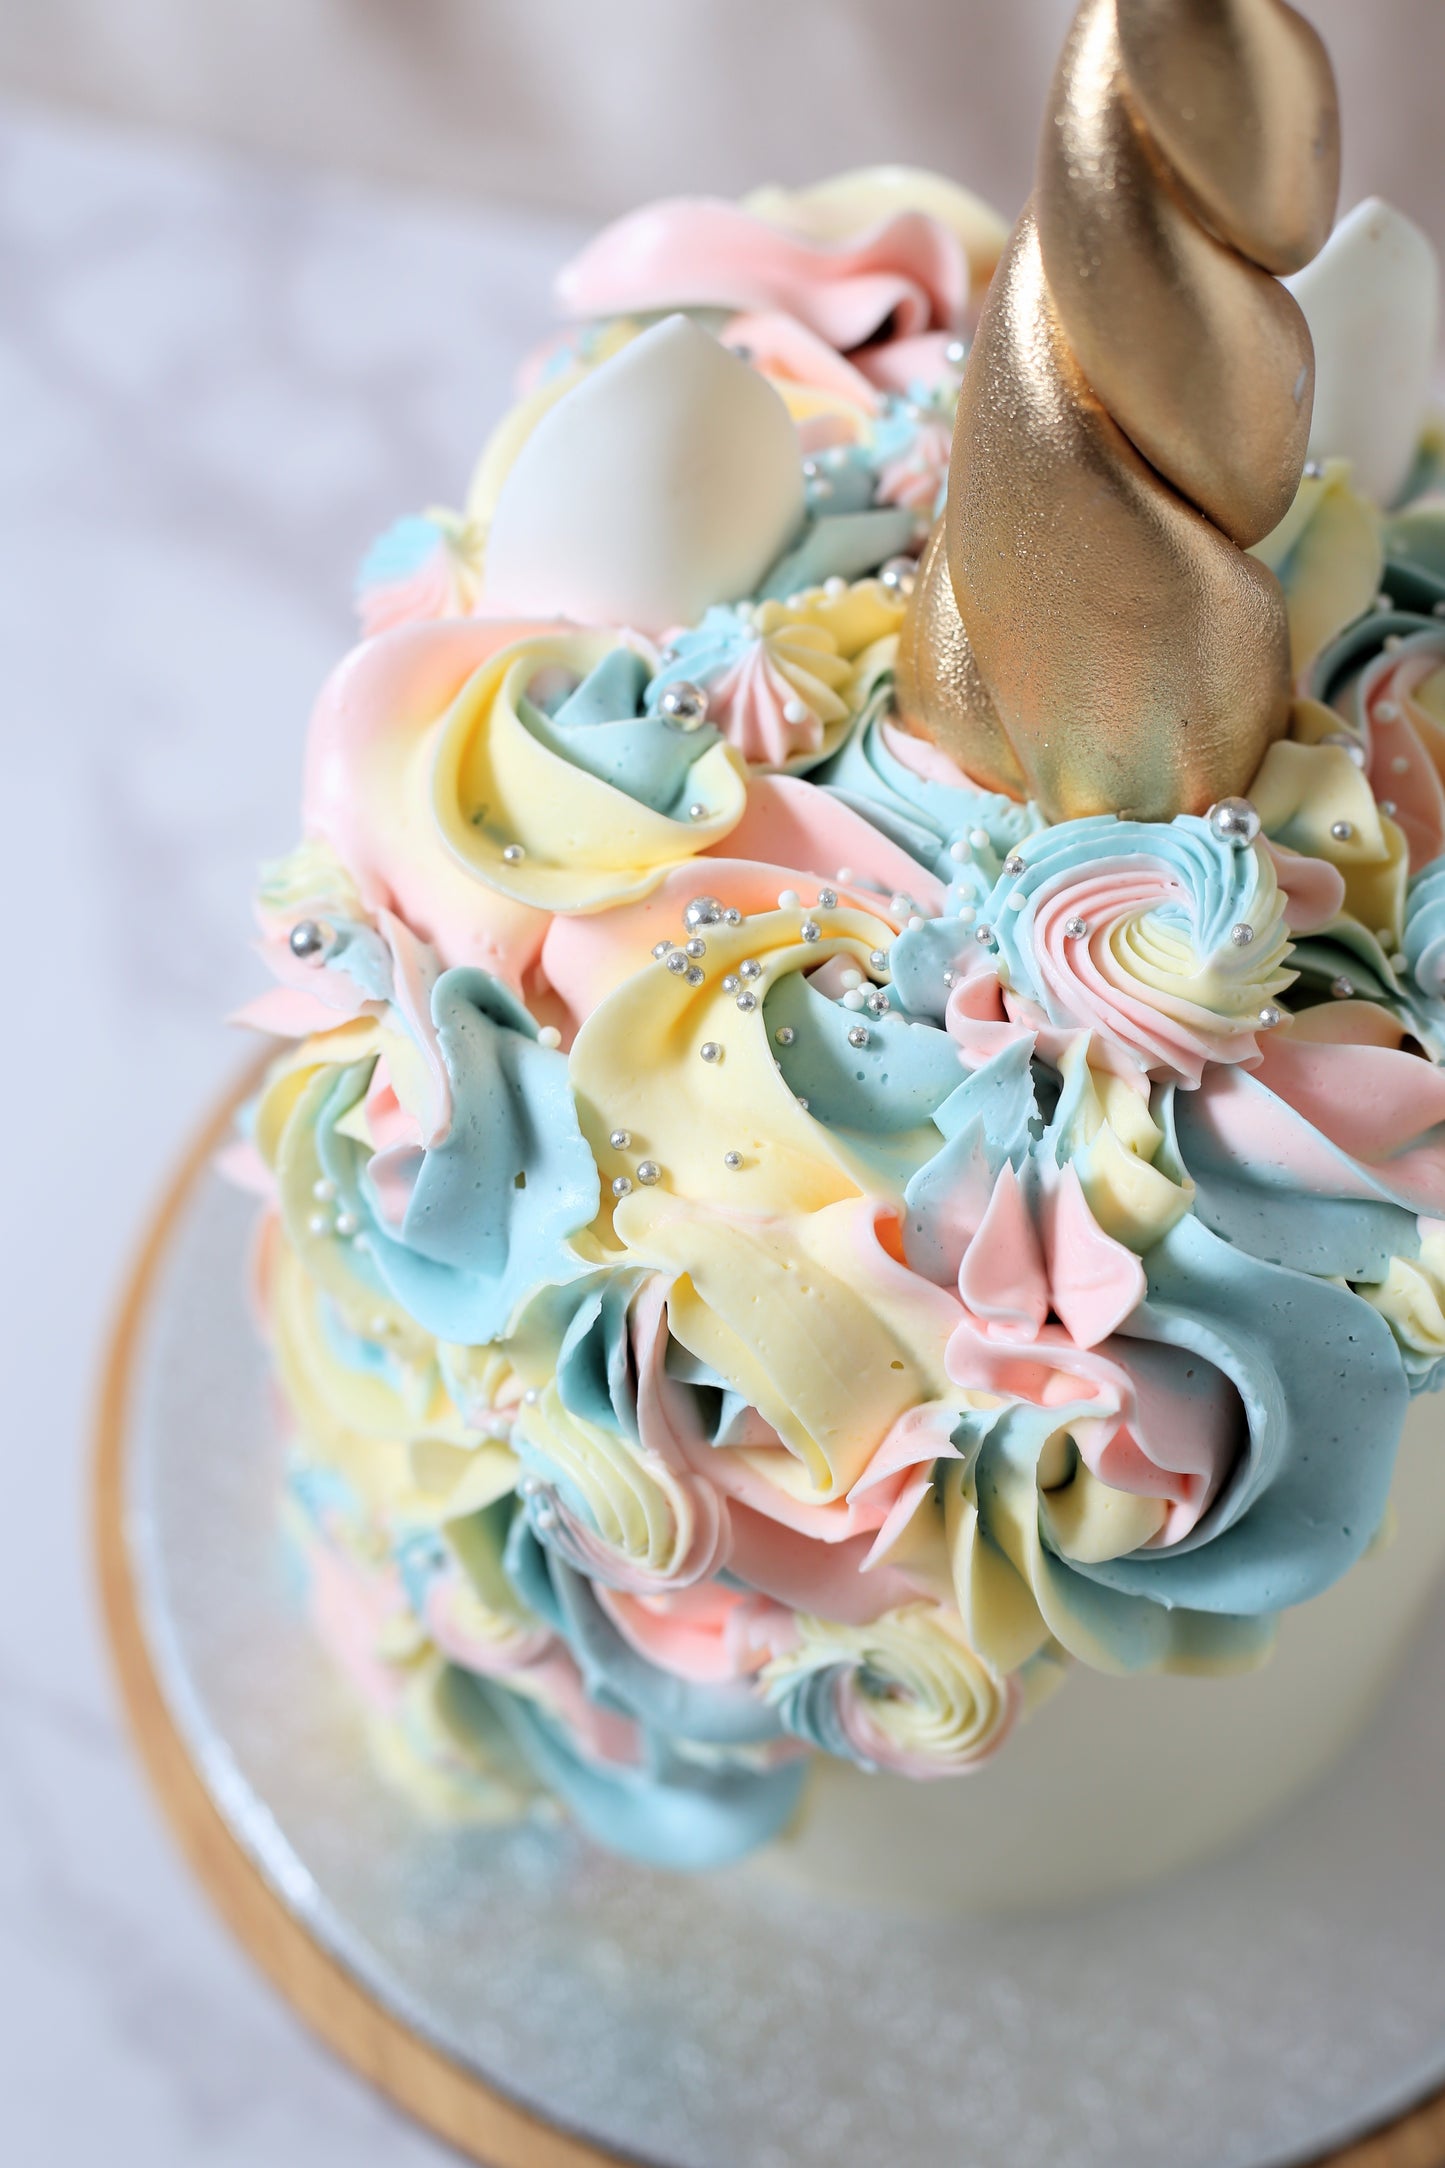 Themed Party Combo - Classic Unicorn Cake and Cupcake Tower